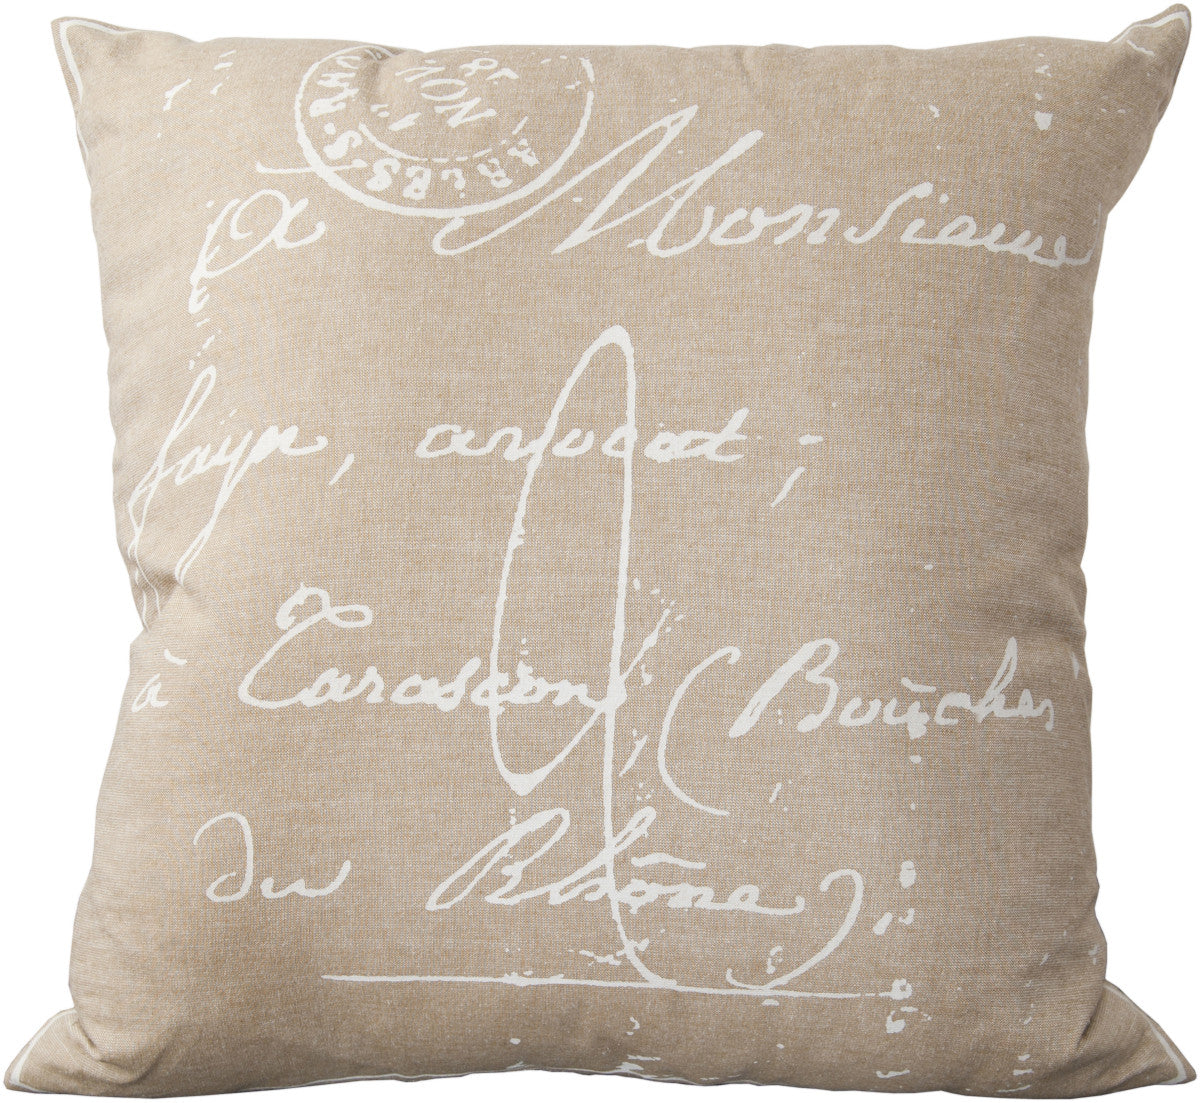 Surya Montpellier Classical French Script LG-511 Pillow